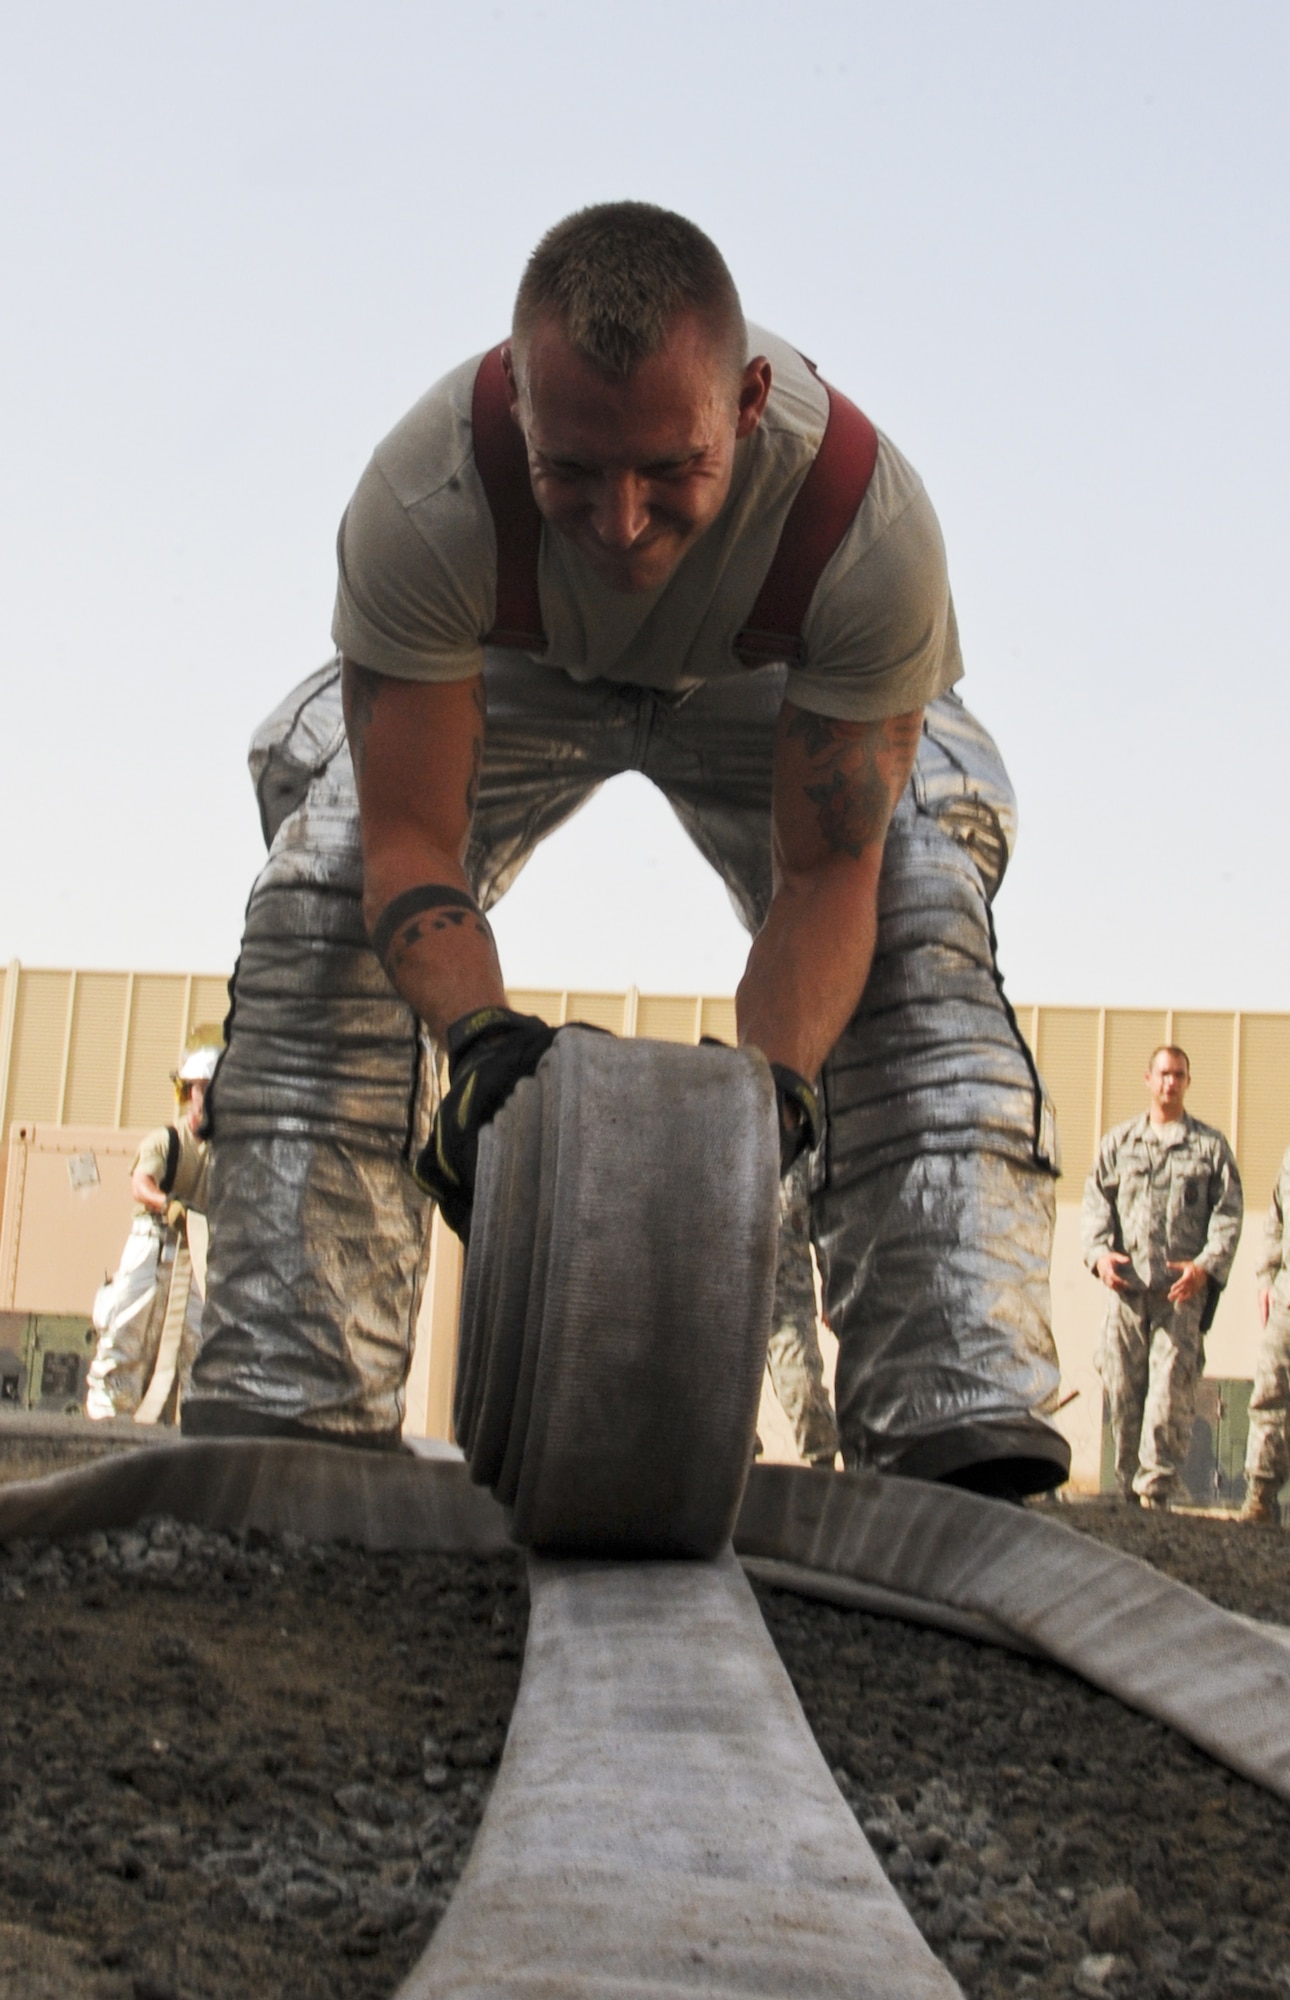 U.S. Air Force Staff Sgt. Bryan Buck, 380th Civil Engineer Squadron Fire Department crew chief, rolls up a hose after an exercise at an undisclosed location in Southwest Asia Aug. 1, 2013. . During the exercise, Bucks’ team was required to show the capability to swiftly deploy handline hoses. Buck calls Milton, Penn., home and is deployed from Mountain Home Air Force Base, Idaho. (U.S. Air Force photo by Staff Sgt. Jacob Morgan)